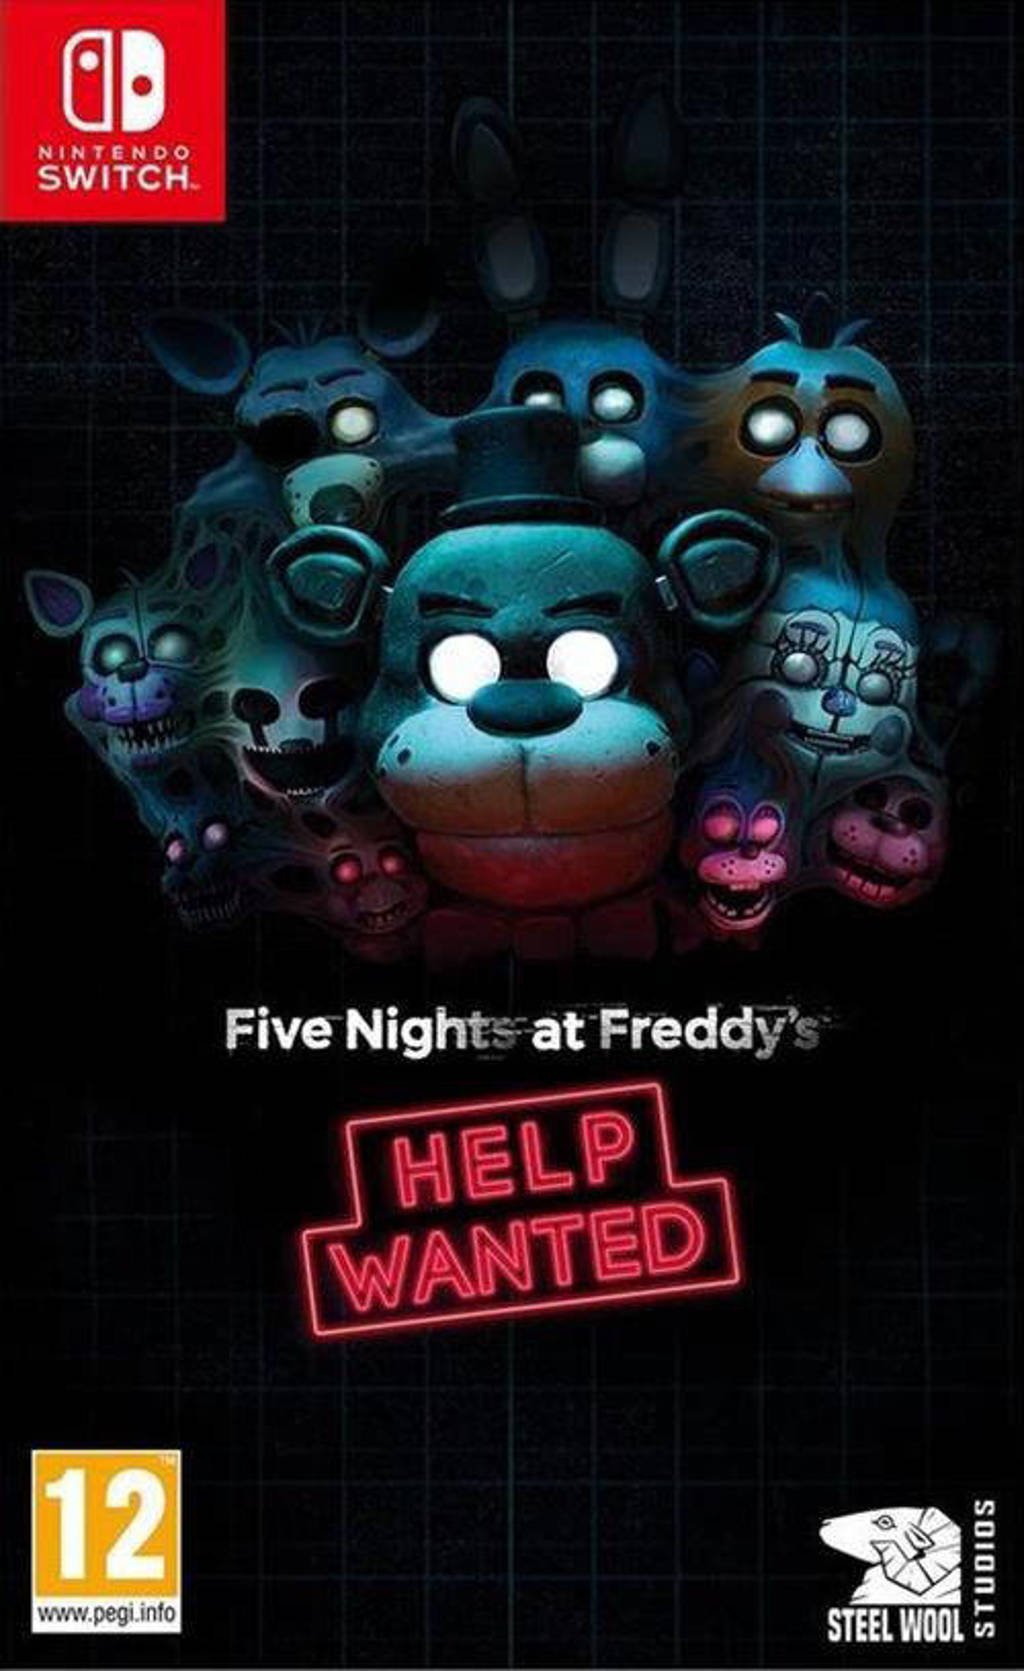 Five nights at Freddy's - Help wanted (Nintendo Switch)